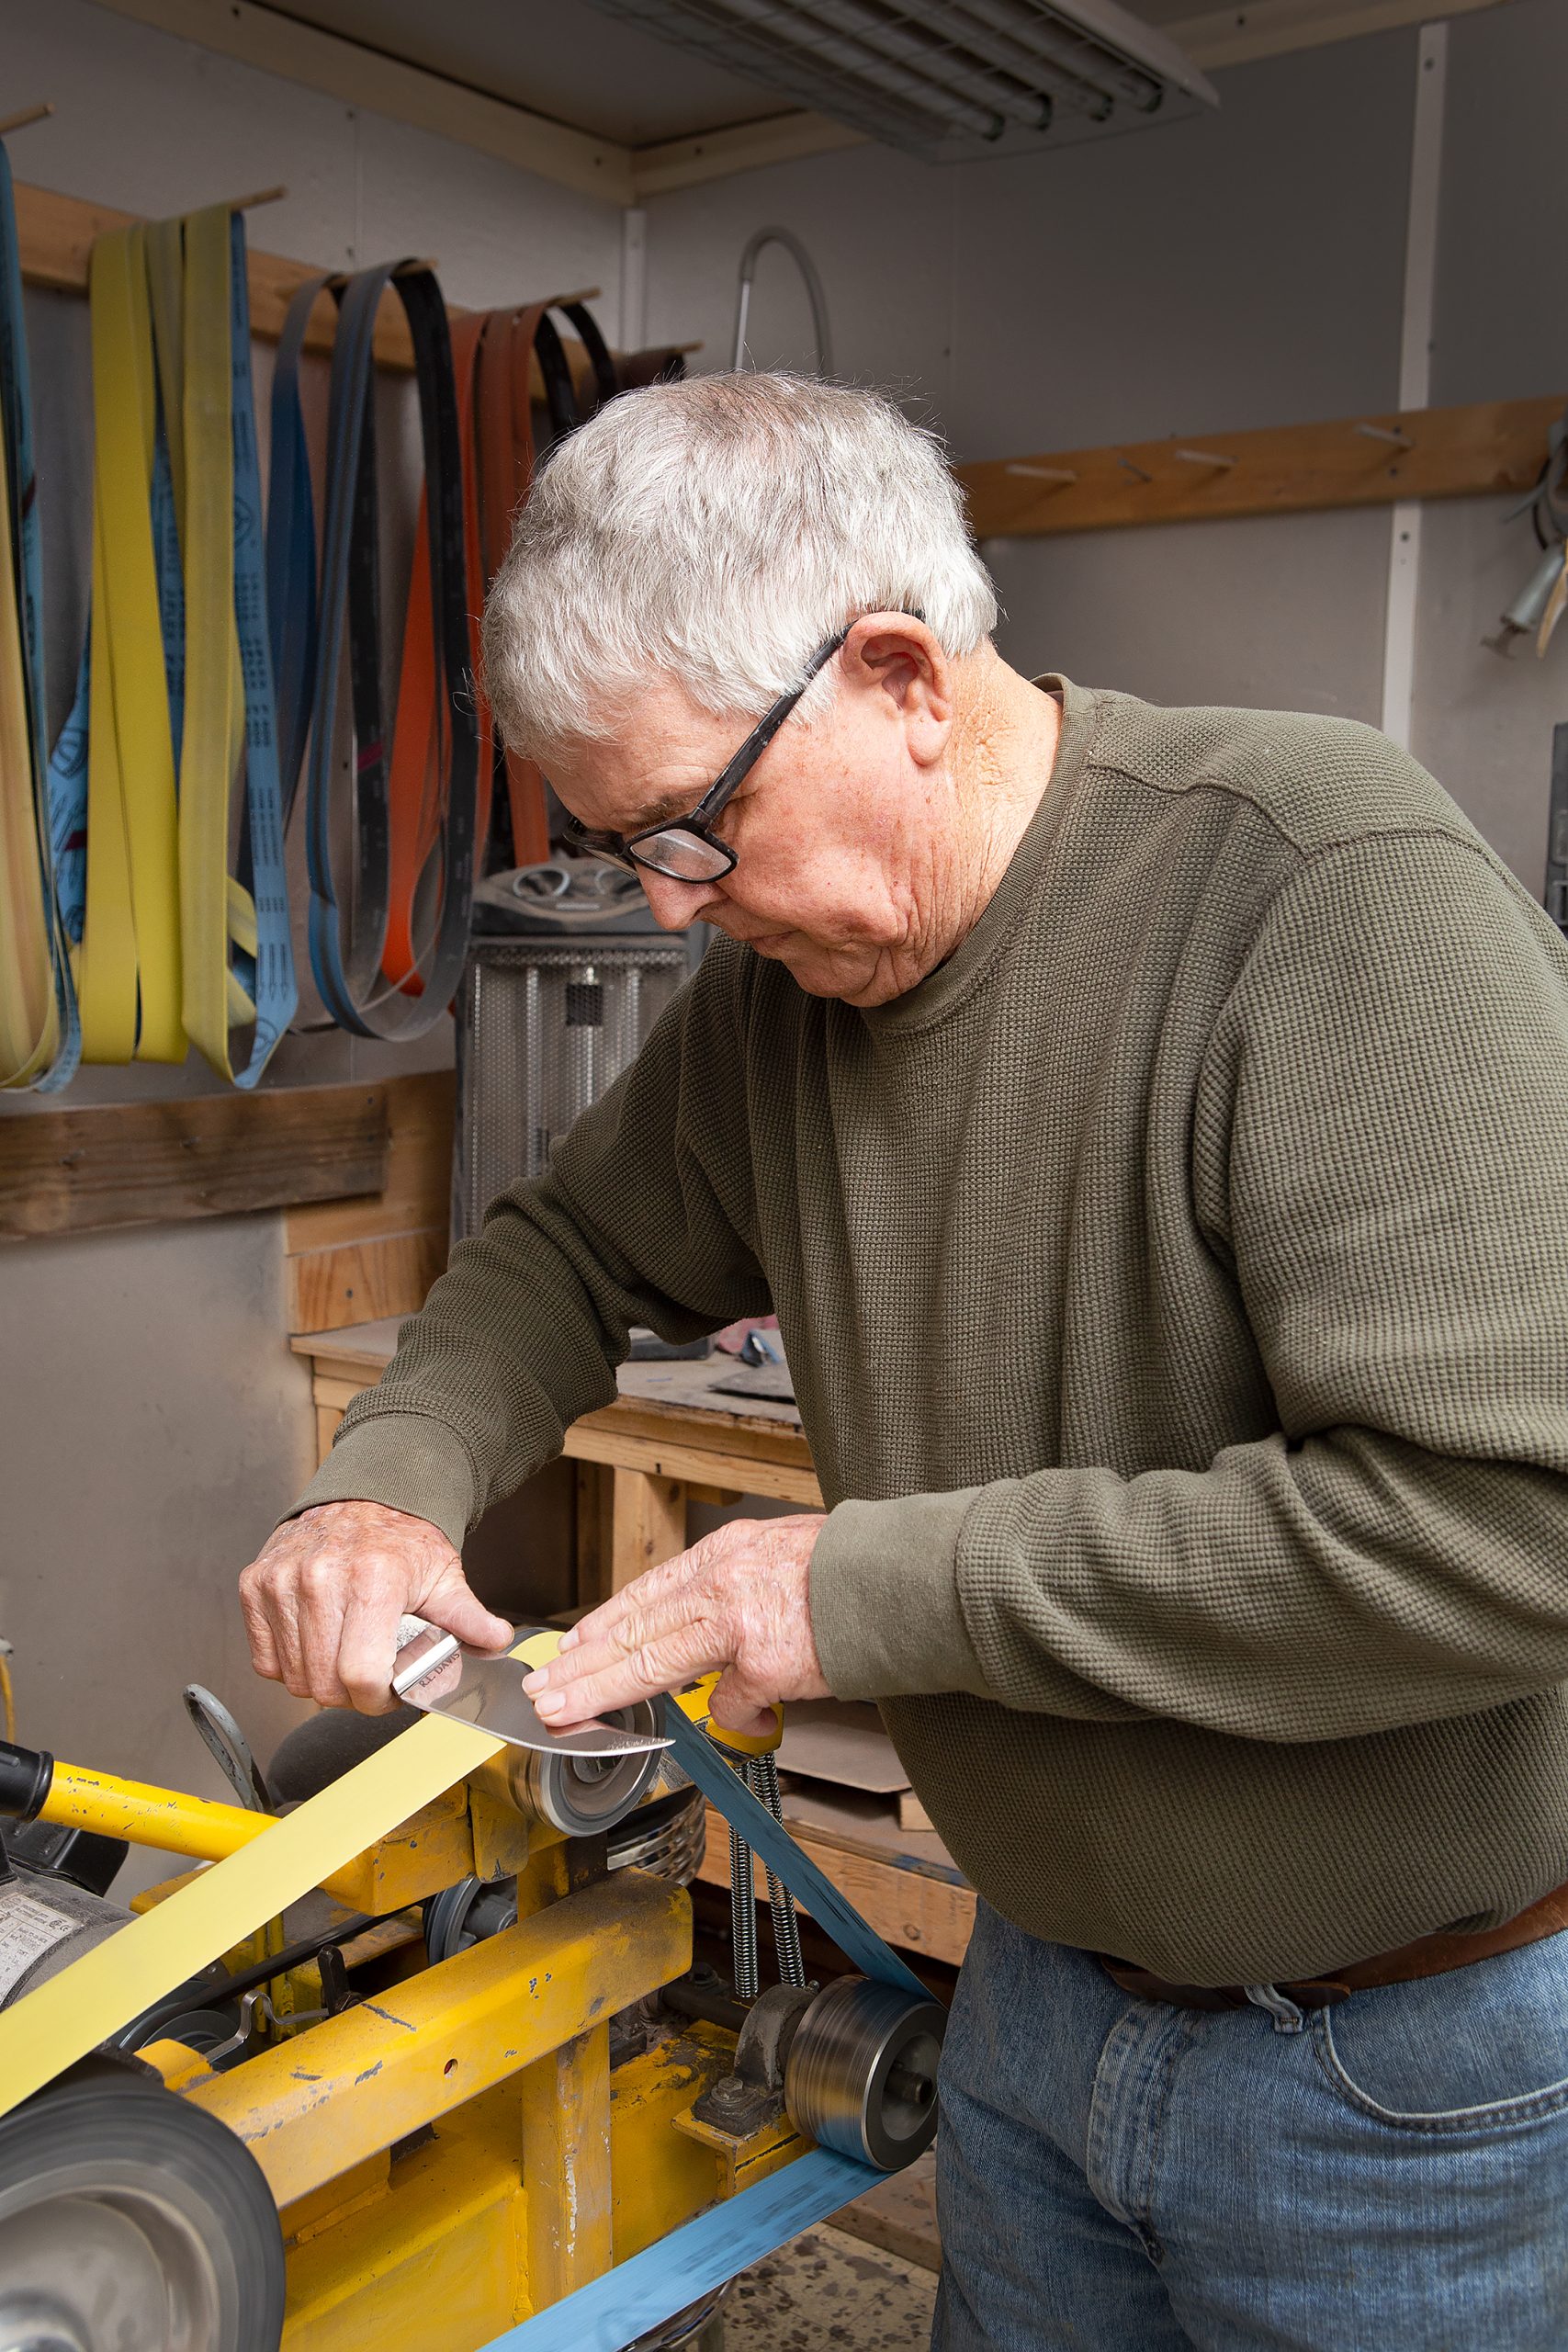 Working at the sander, Robert cuts down, shapes, and polishes the blades and handles of his knives. 
